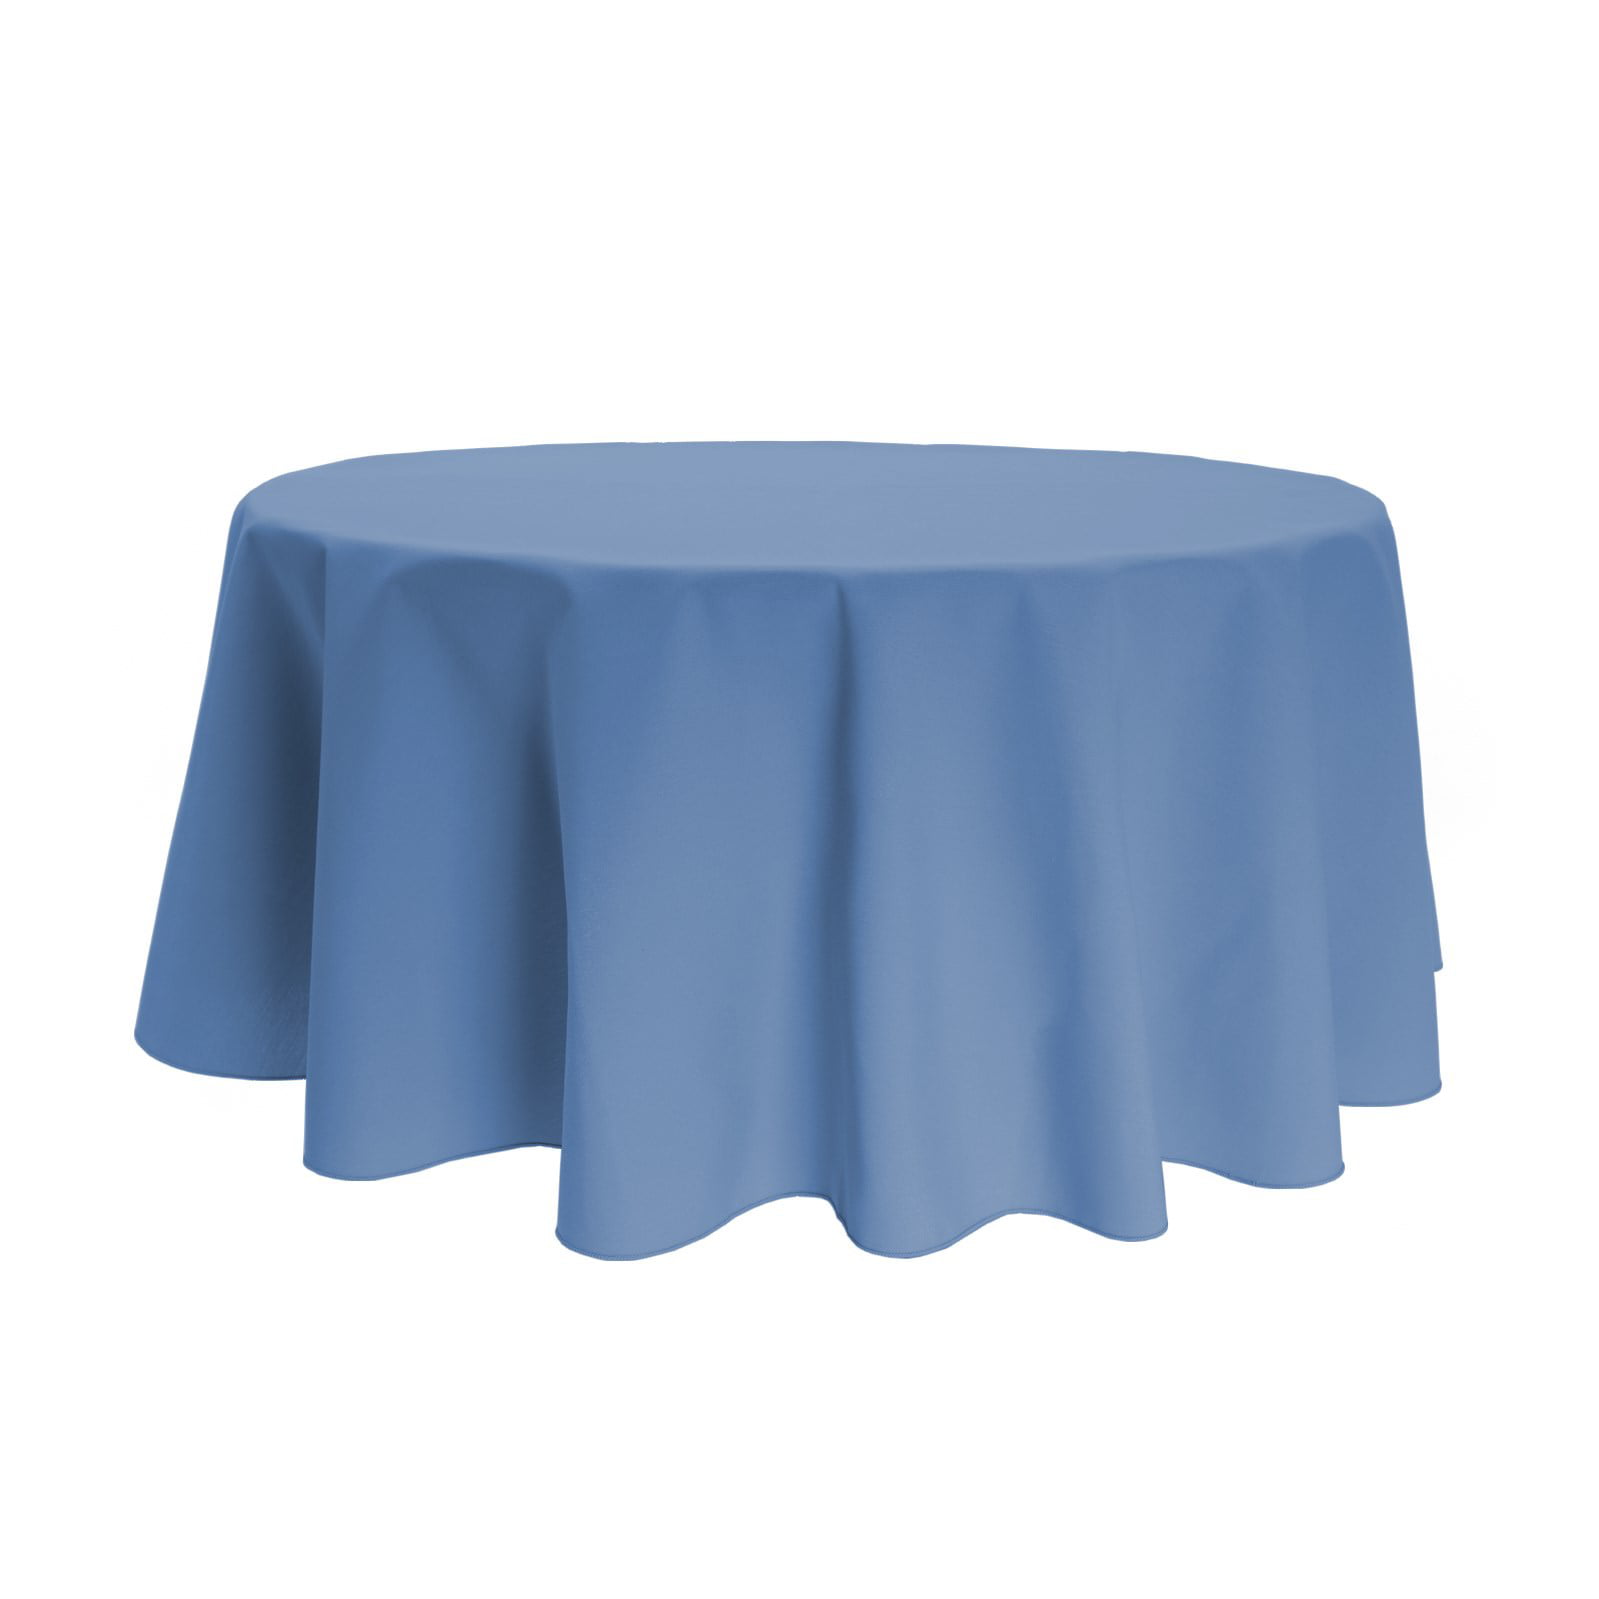 vinyl tablecloths 60 round fitted